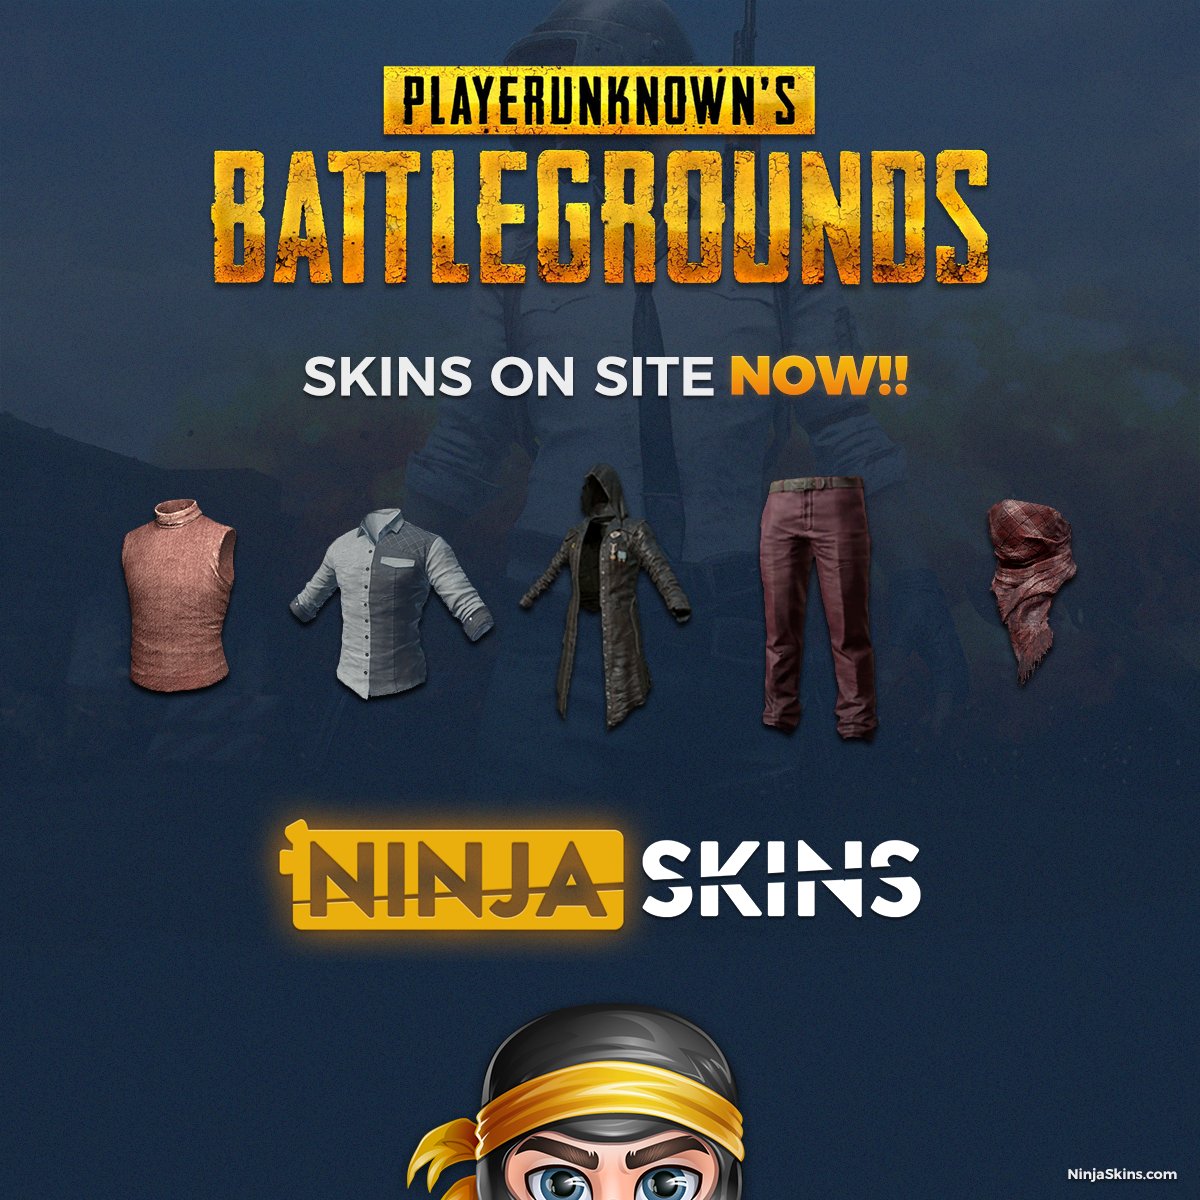 Ninjaskins Com Fever Time Deposit Win Withdraw Come Beat The Ninja For Some Chicken Dinner Pubgskins Pubg Pubgiveaway Csgo Csgogiveway Pubg Skins Are In Stock T Co X33u6h1rzv T Co hvmwqoip Twitter